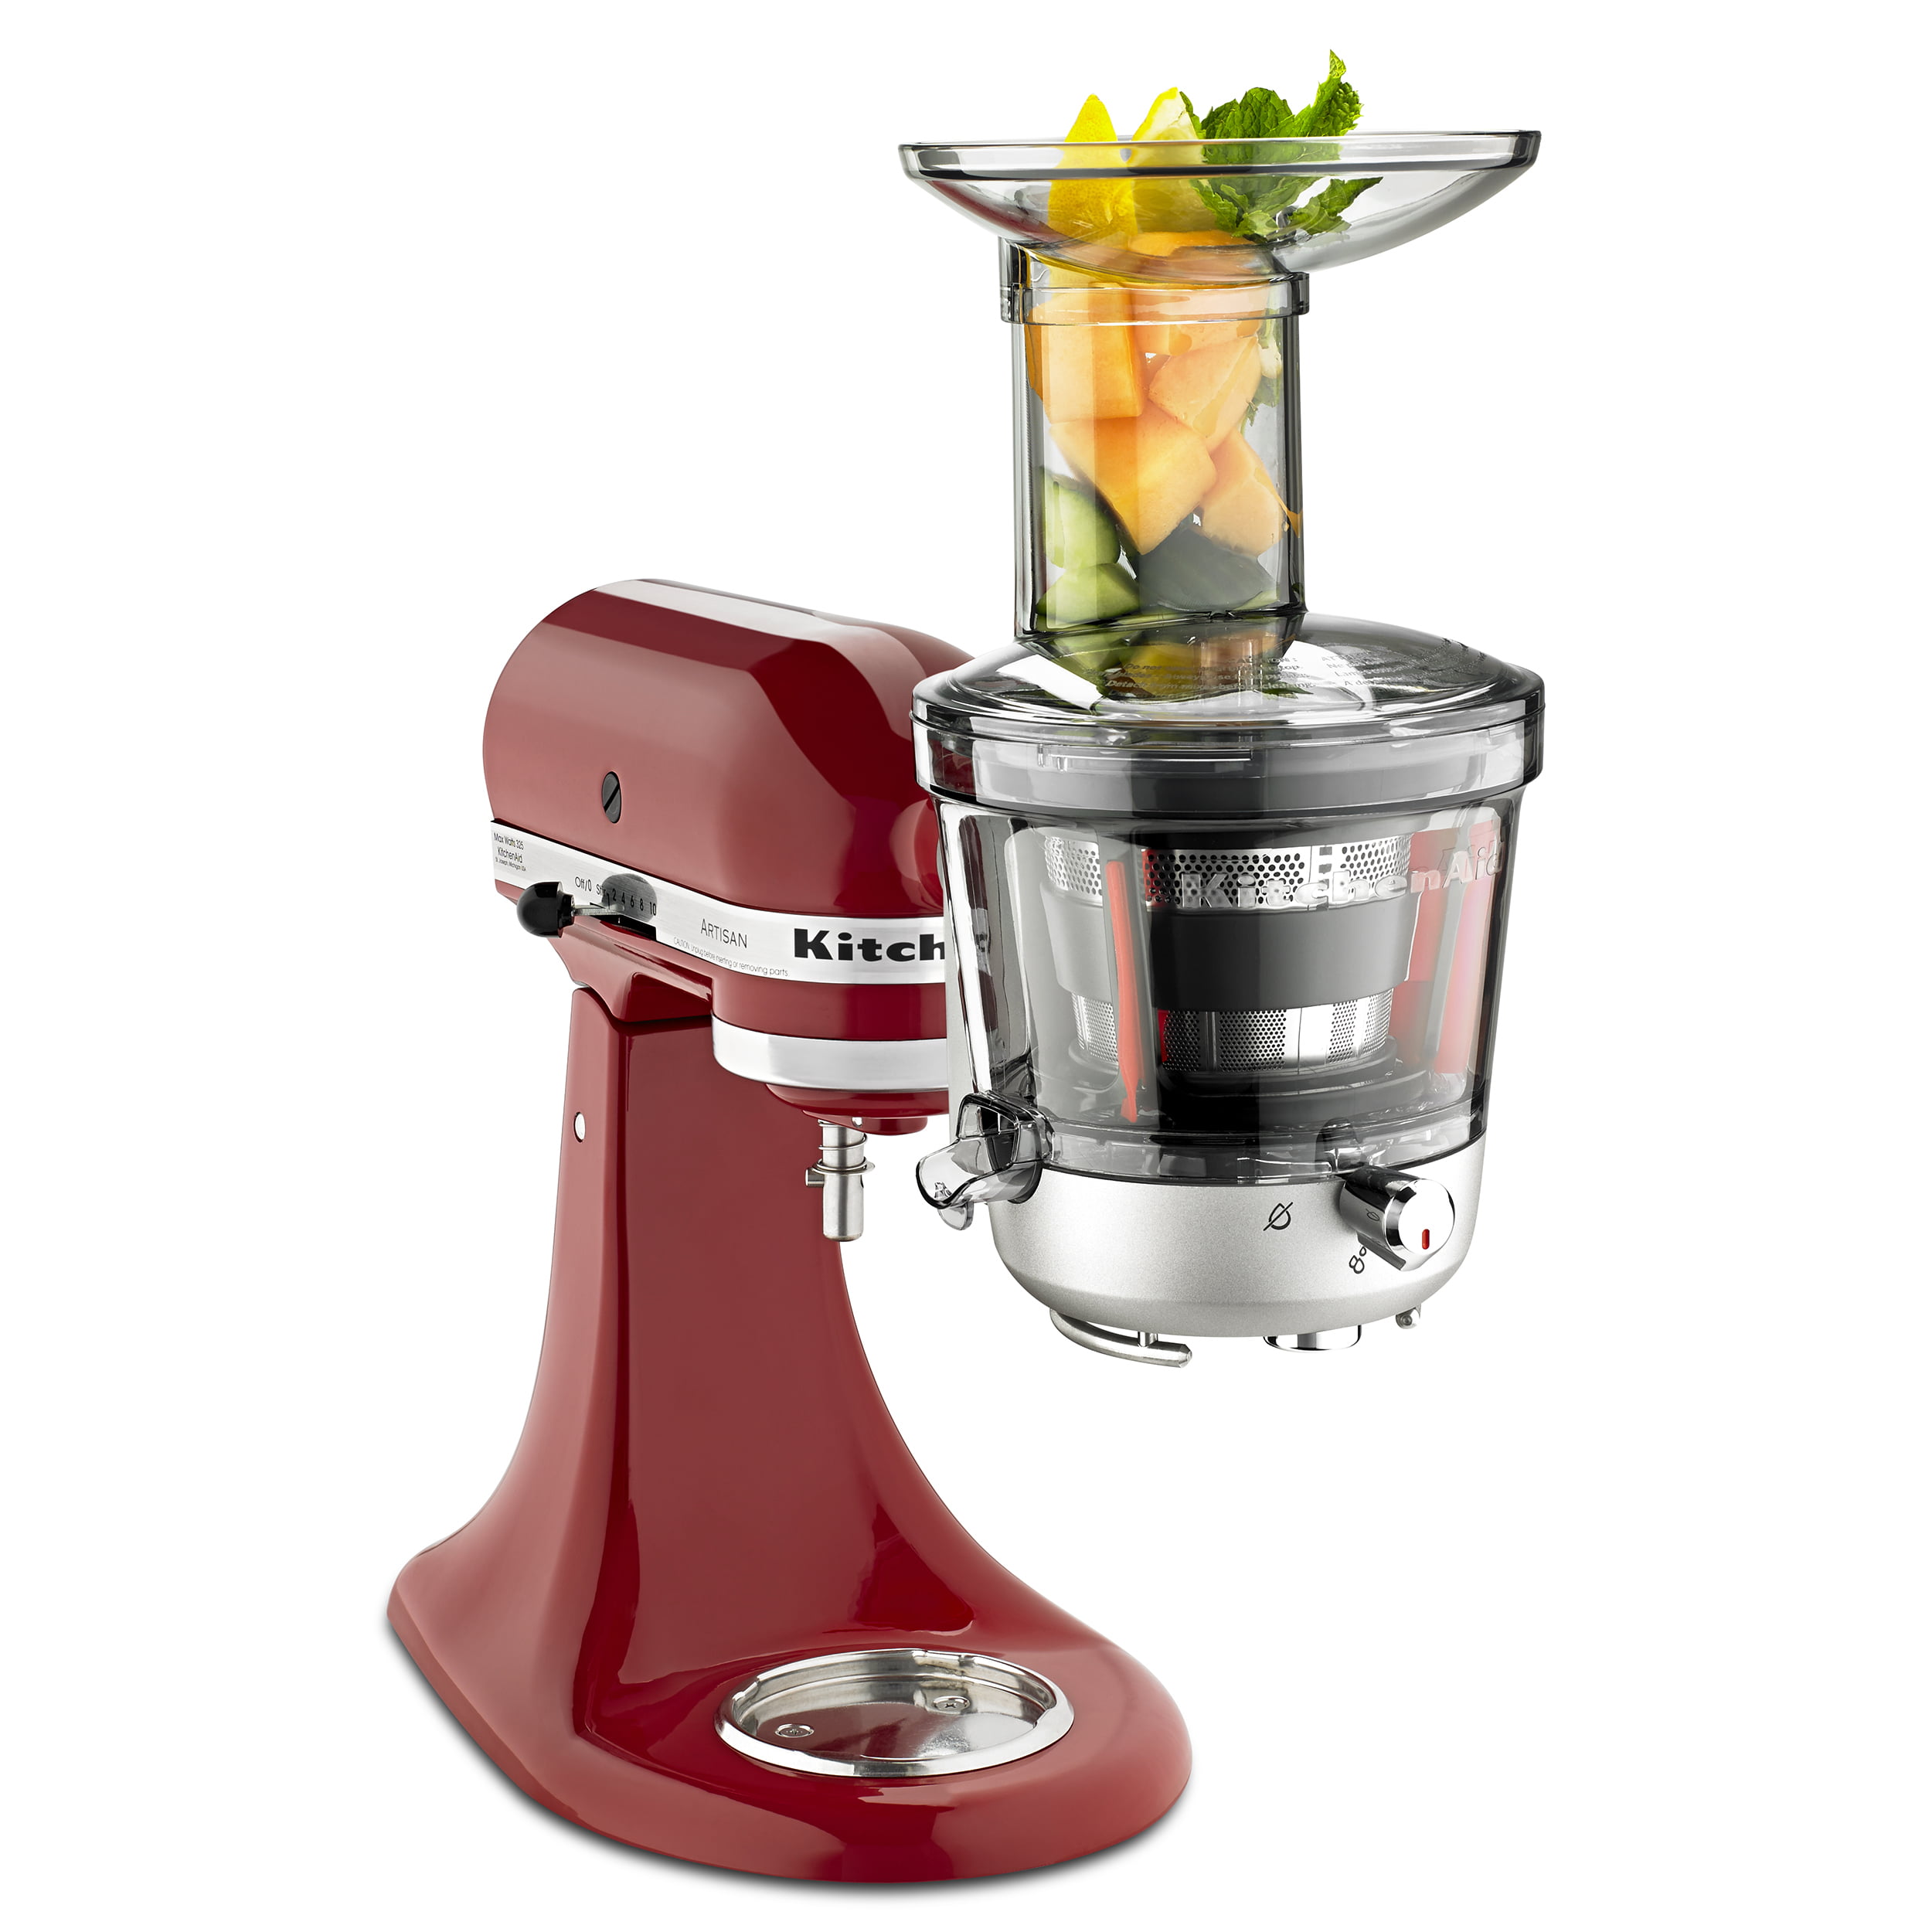 12 Best Kitchenaid Juicer Attachment For Stand Mixer for 2023